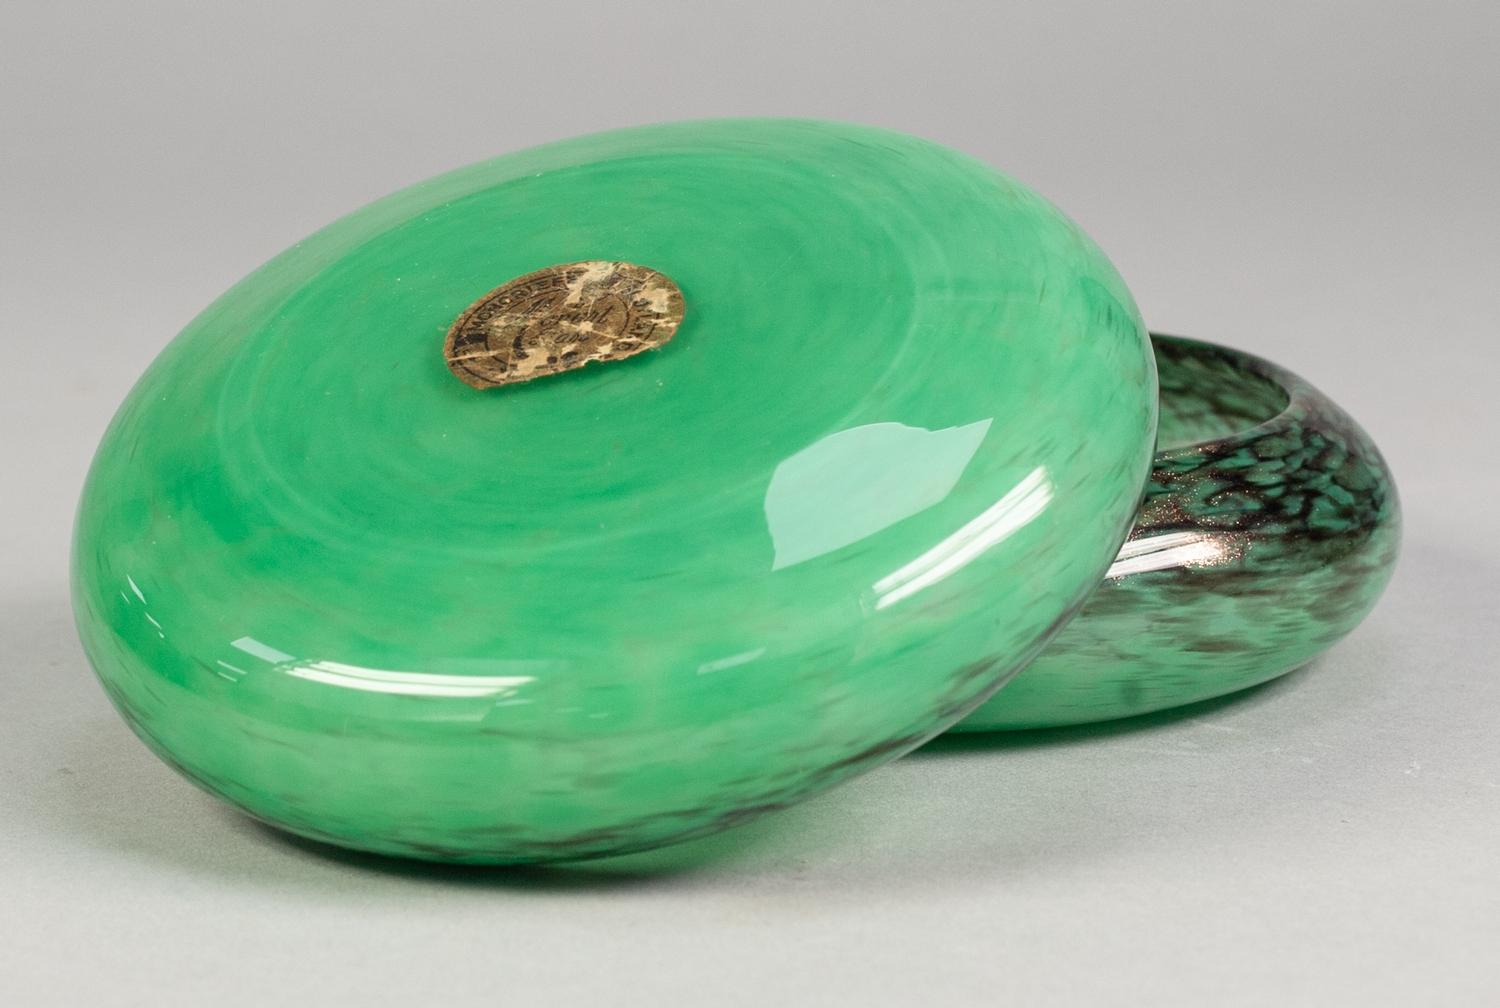 PAIR OF SCOTTISH, MONART LABELLED, SHALLOW GLASS DISHES, green mottled, with turned-in rims, with - Image 2 of 2